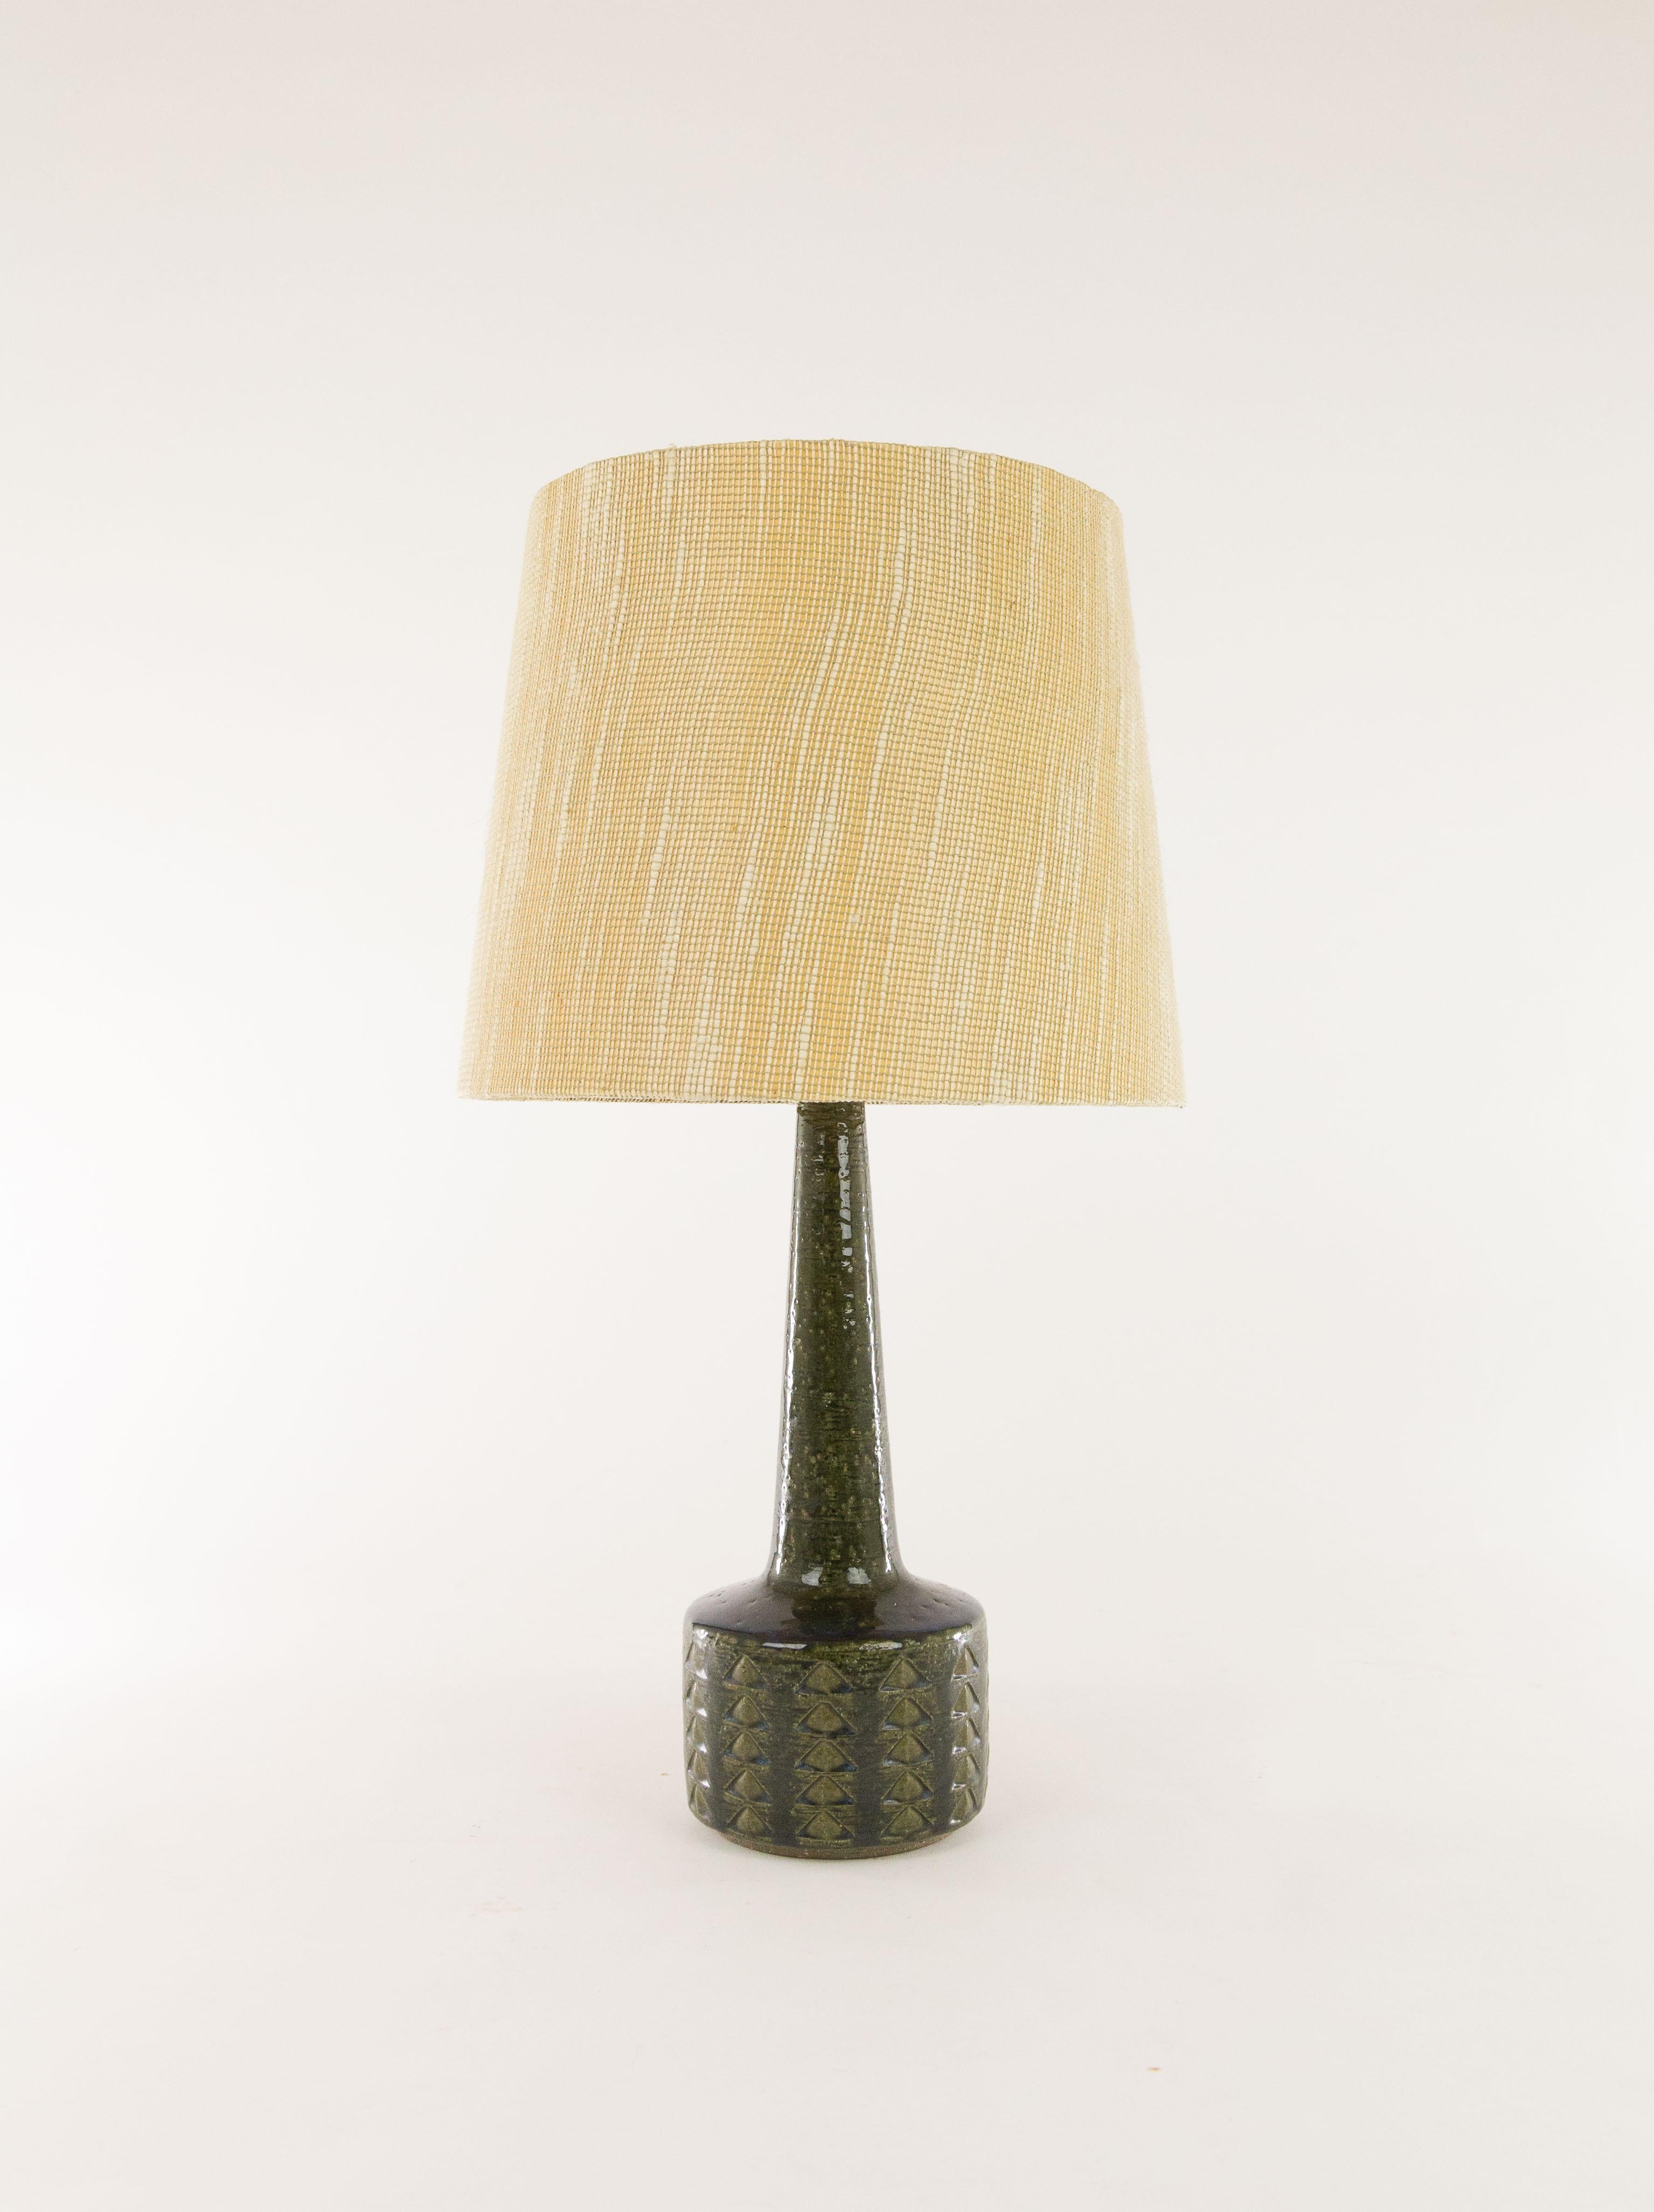 Model DL/35 table lamp made by Annelise and Per Linnemann-Schmidt for Palshus in the 1960s. The colour of the handmade decorated base is Dark Olive Green with traces of Blue. 

The lamp comes with its original lampshade holder. The lampshade and the